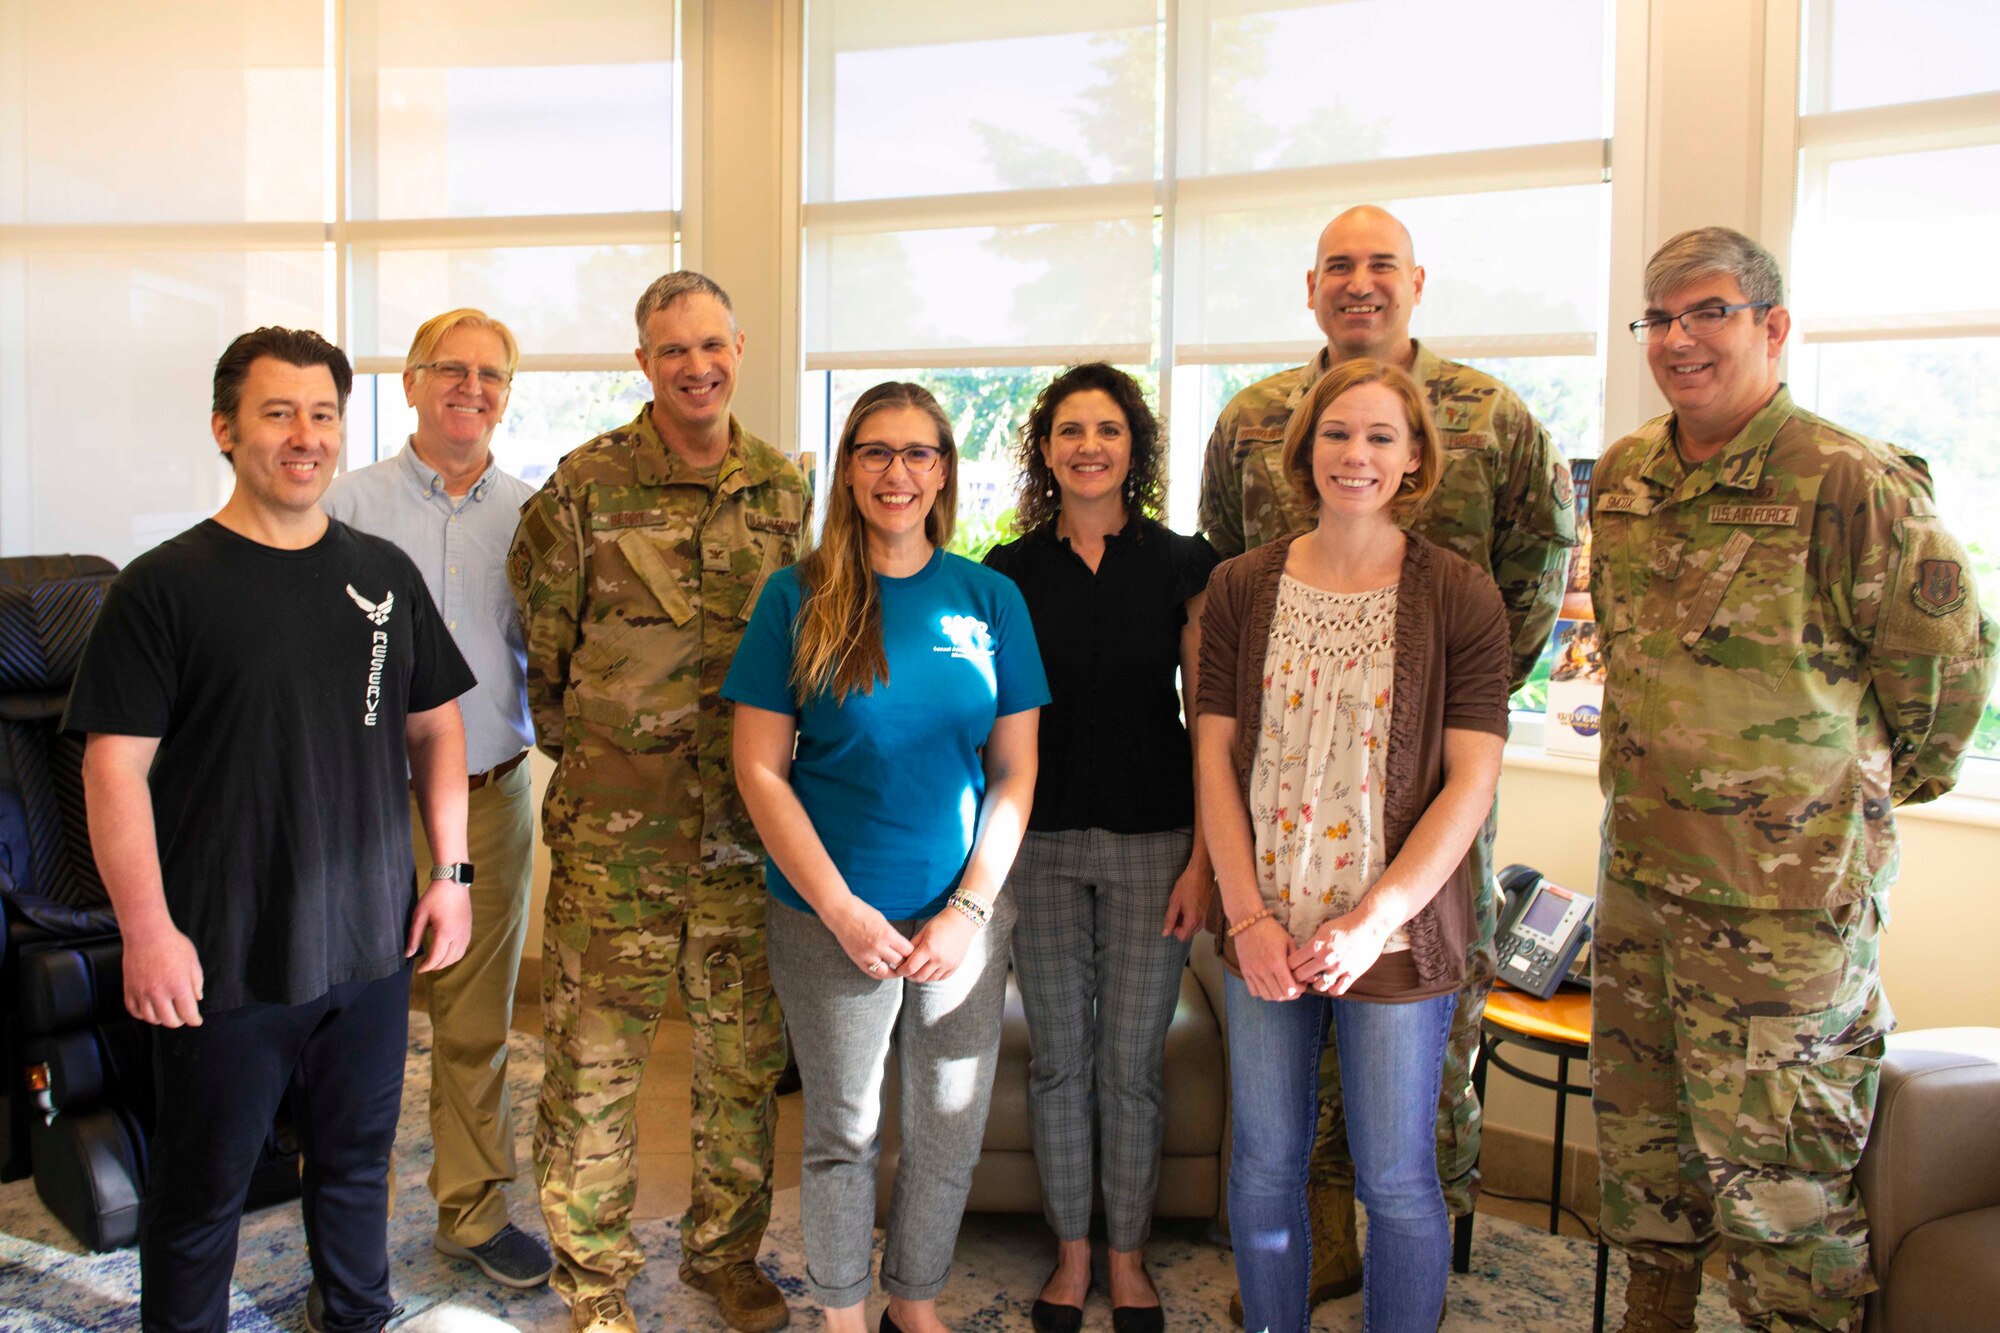 From left to right: Eric Neal, 934 AW Health and Fitness program manager, Michael Sanford, 934 AW Violence Prevention Integrator, Col Gregory Berry, 934 AW vice commander, Chayo Smith, 934 AW Bioenvironmental Engineering Flight and Public Health Services chief, Kelly Wilkinson, 934 AW Military and Family Readiness Programs director, Elizabeth Swanson, 934 AW Sexual Assault Response Coordinator, Chaplain Brokenshire, 934 AW deputy wing chaplain and Master Sgt. Ralph Simcox, superintendent of religious affairs pose for a photo during the opening of the new wellness center at the Minneapolis-St. Paul Air Reserve Station, Minnesota on Oct. 5, 2022. (U.S. Air Force photo by Chris Farley) The wellness center is for base personnel to use for de-stressing from work tension or for simply relaxing in a comfortable environment.